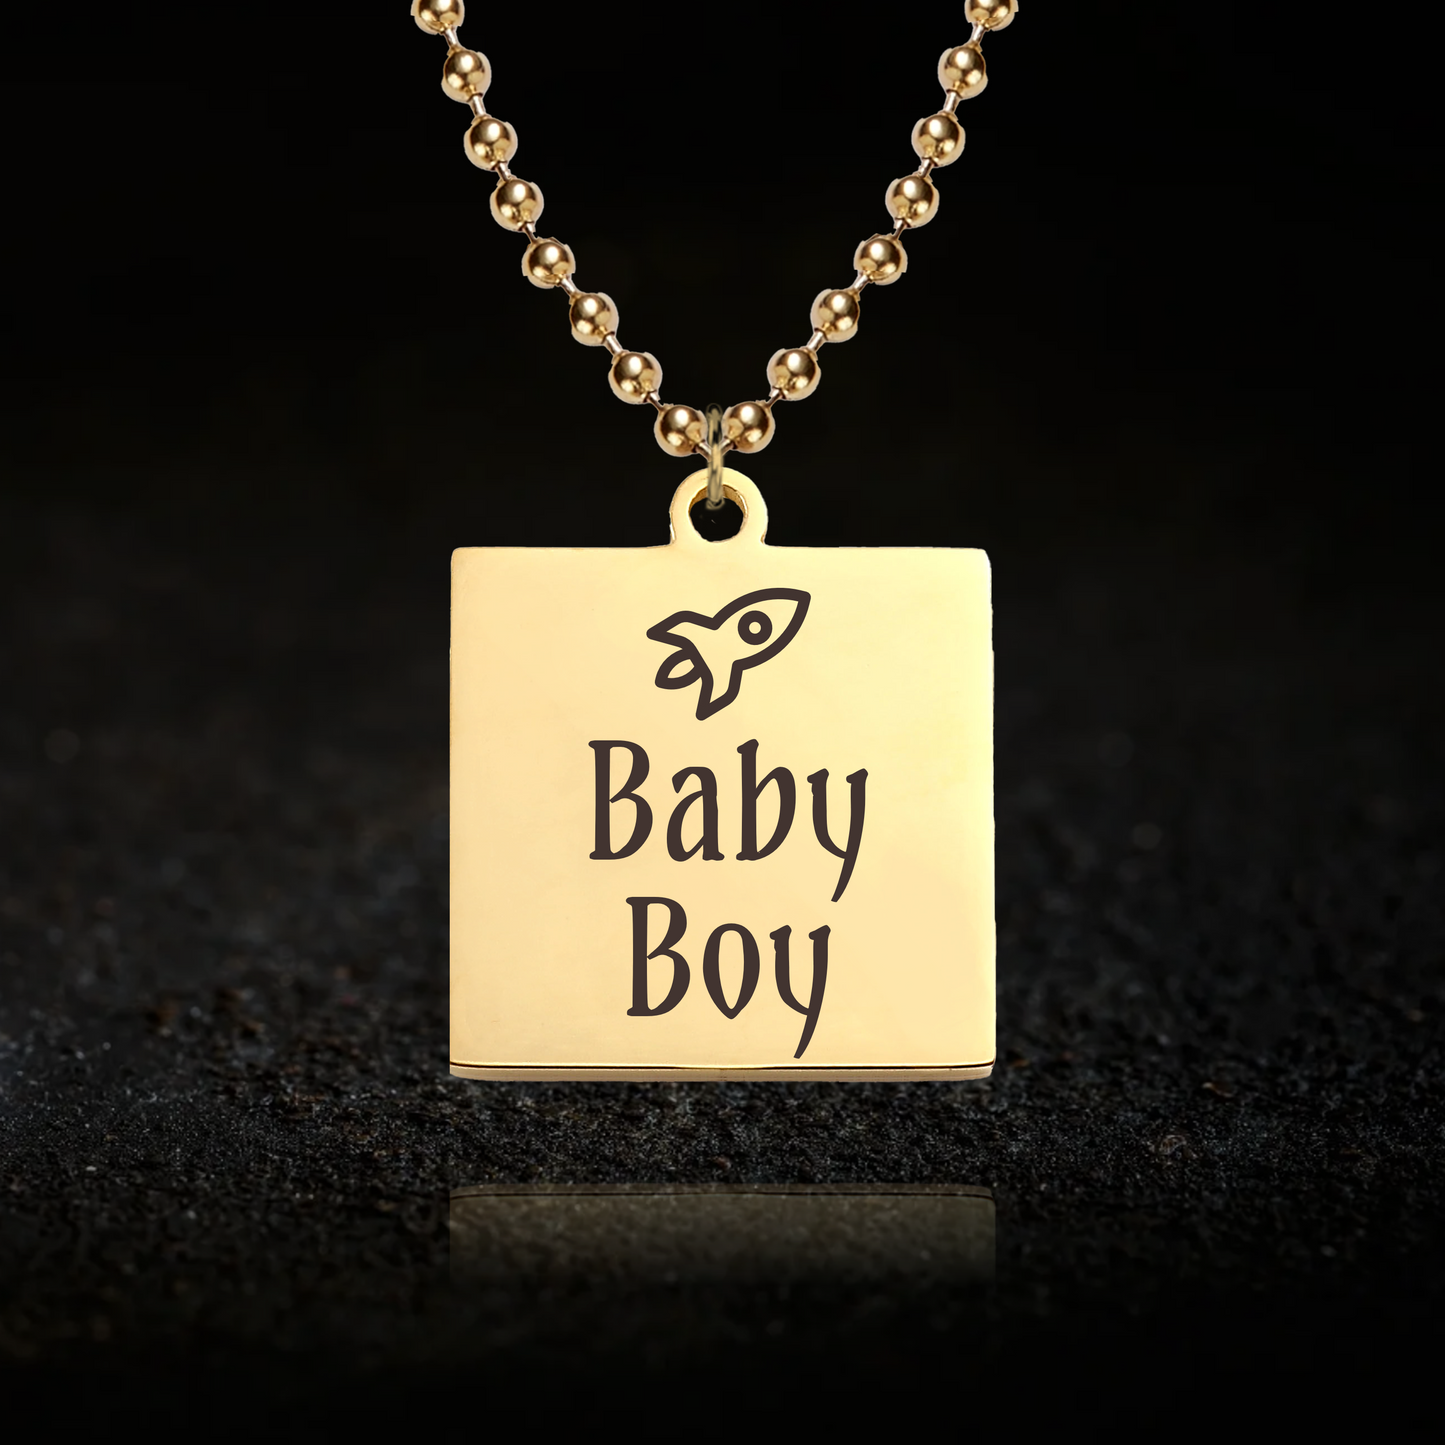 Baby Boy, MDLB Necklace